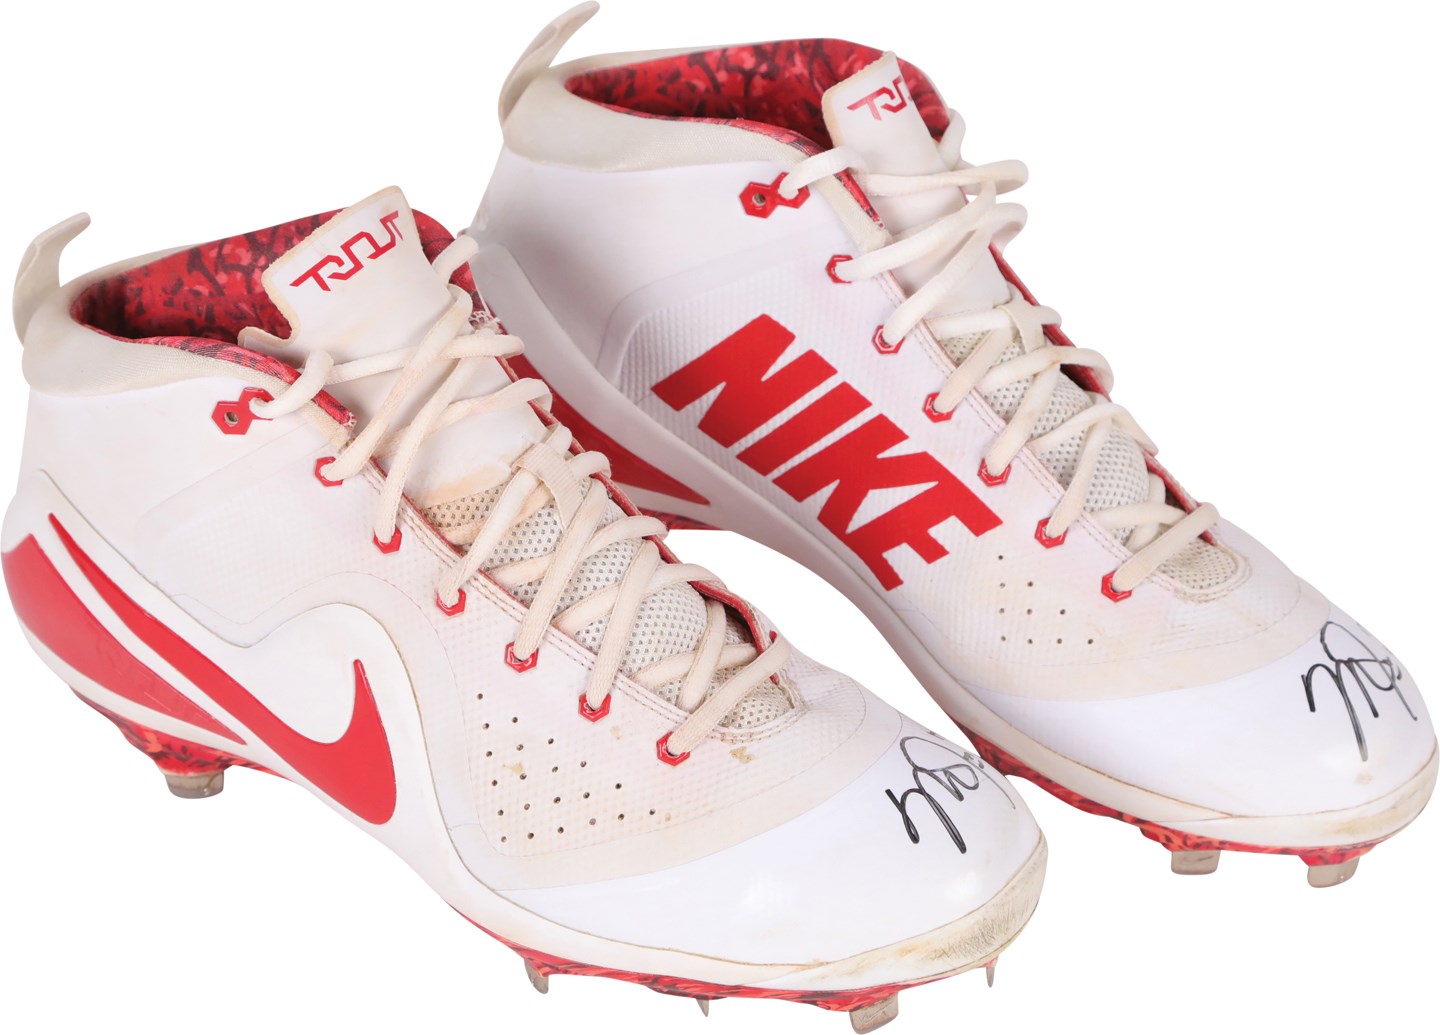 Baseball Equipment - 2017 Mike Trout Photo-Matched HR #197 Los Angeles Signed Game Worn Cleats (Anderson Authentic, Photo-Matched, JSA)